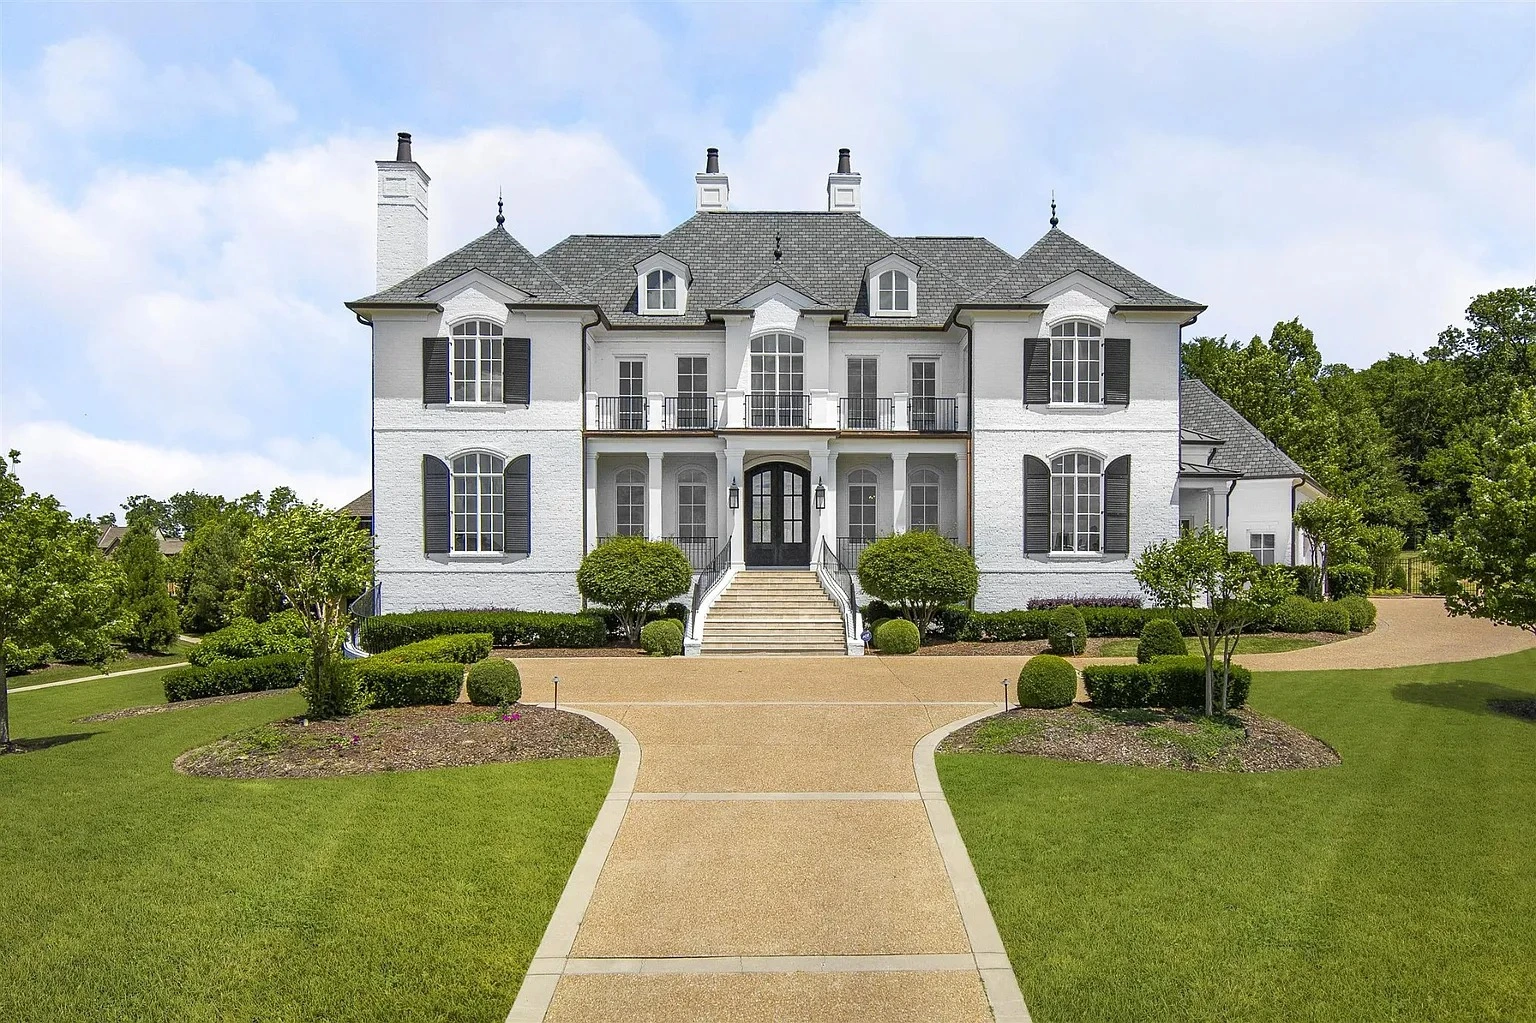 The second 10-bedroom mansion Chrisleys bought for $3.37 million